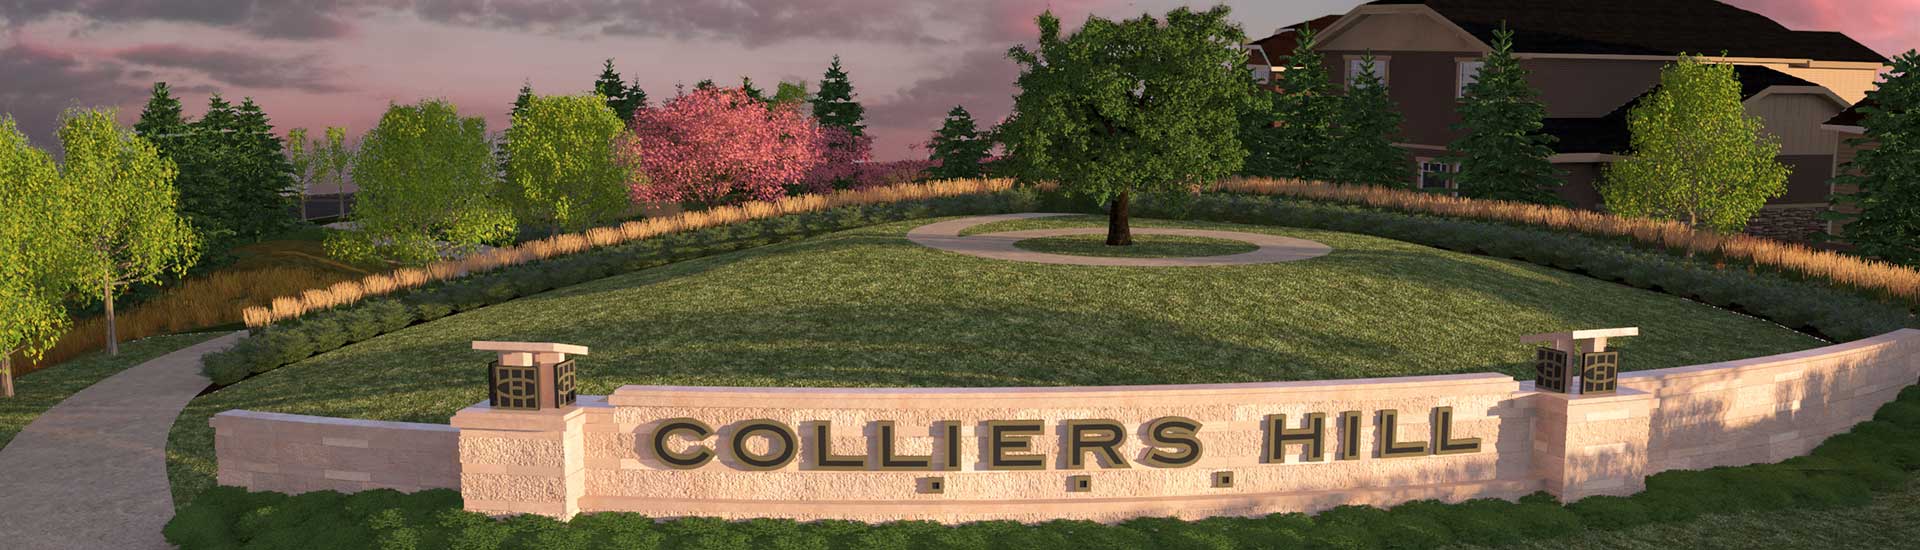 Colliers Hill